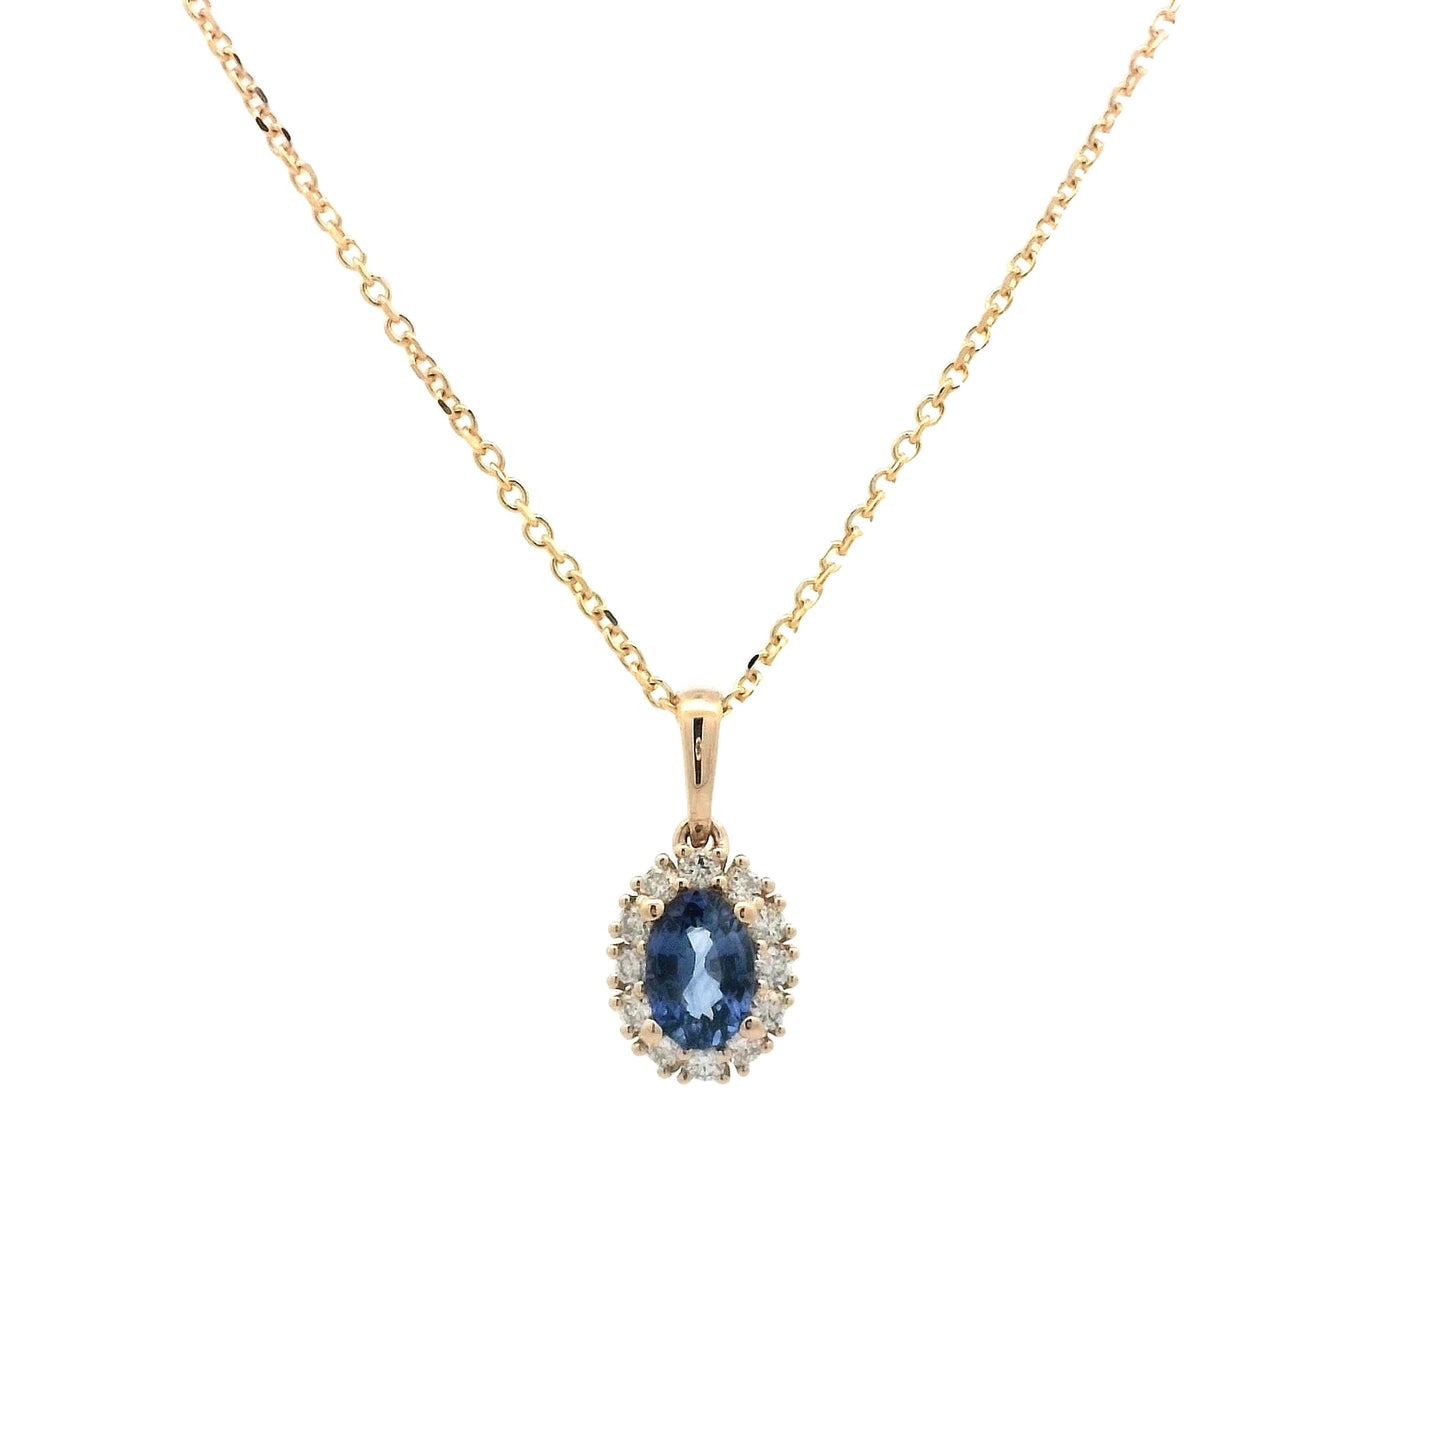 .54 Blue Sapphire Oval Pendant Yellow Gold Necklace